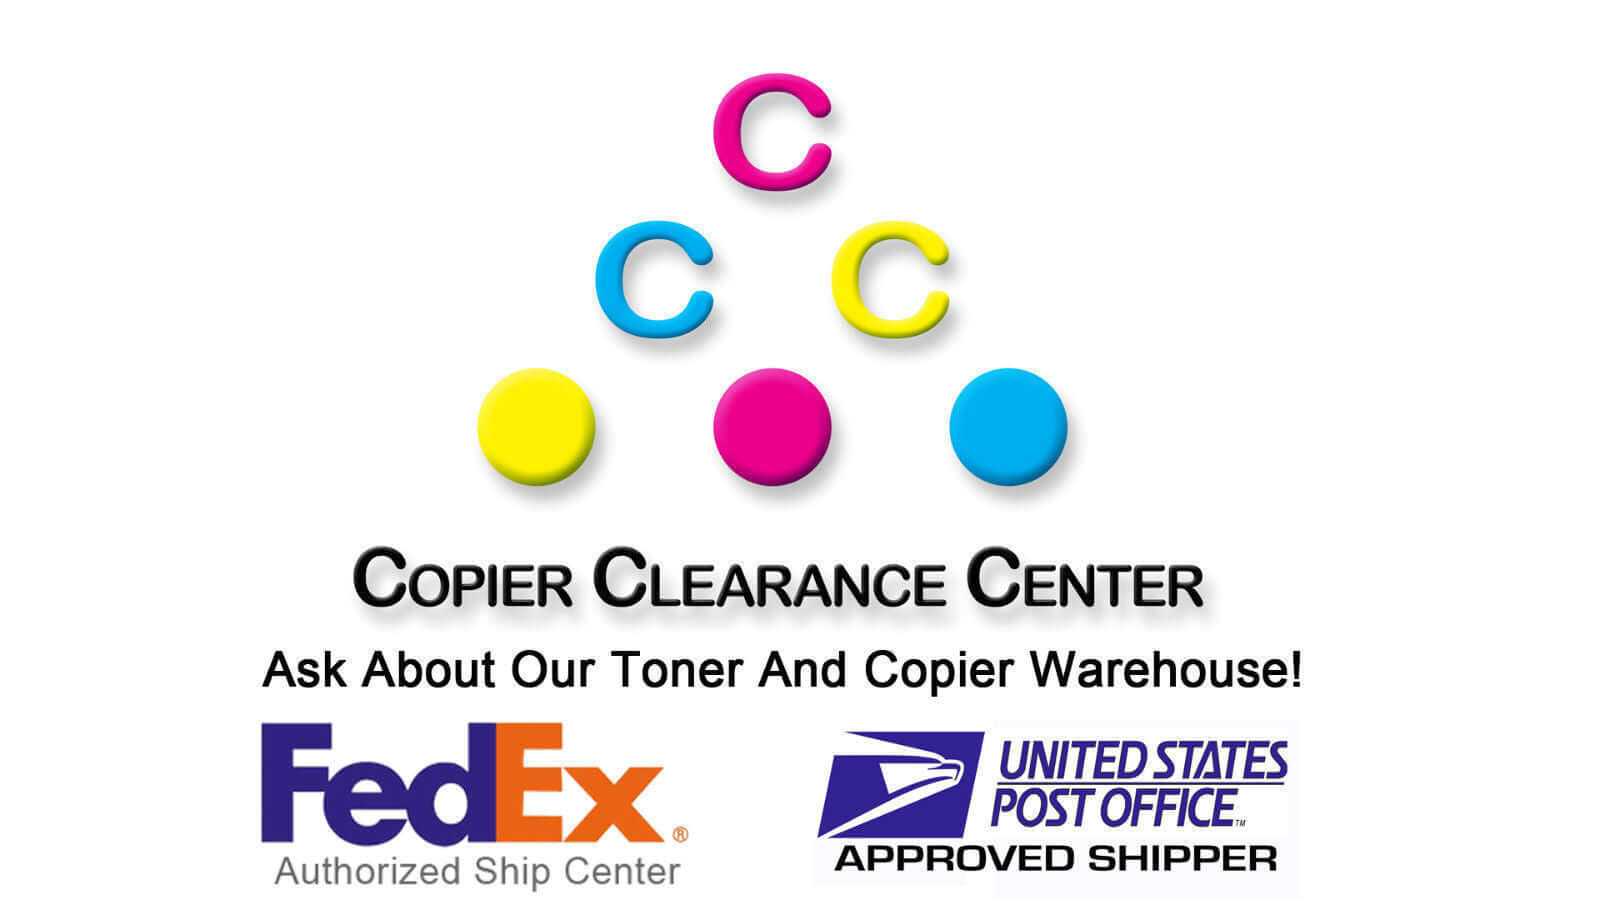 3 Compatible With Canon GPR-23 MYK Toner For iR C2550 C2880 C3080 FedEx 2Day!! - copier-clearance-center